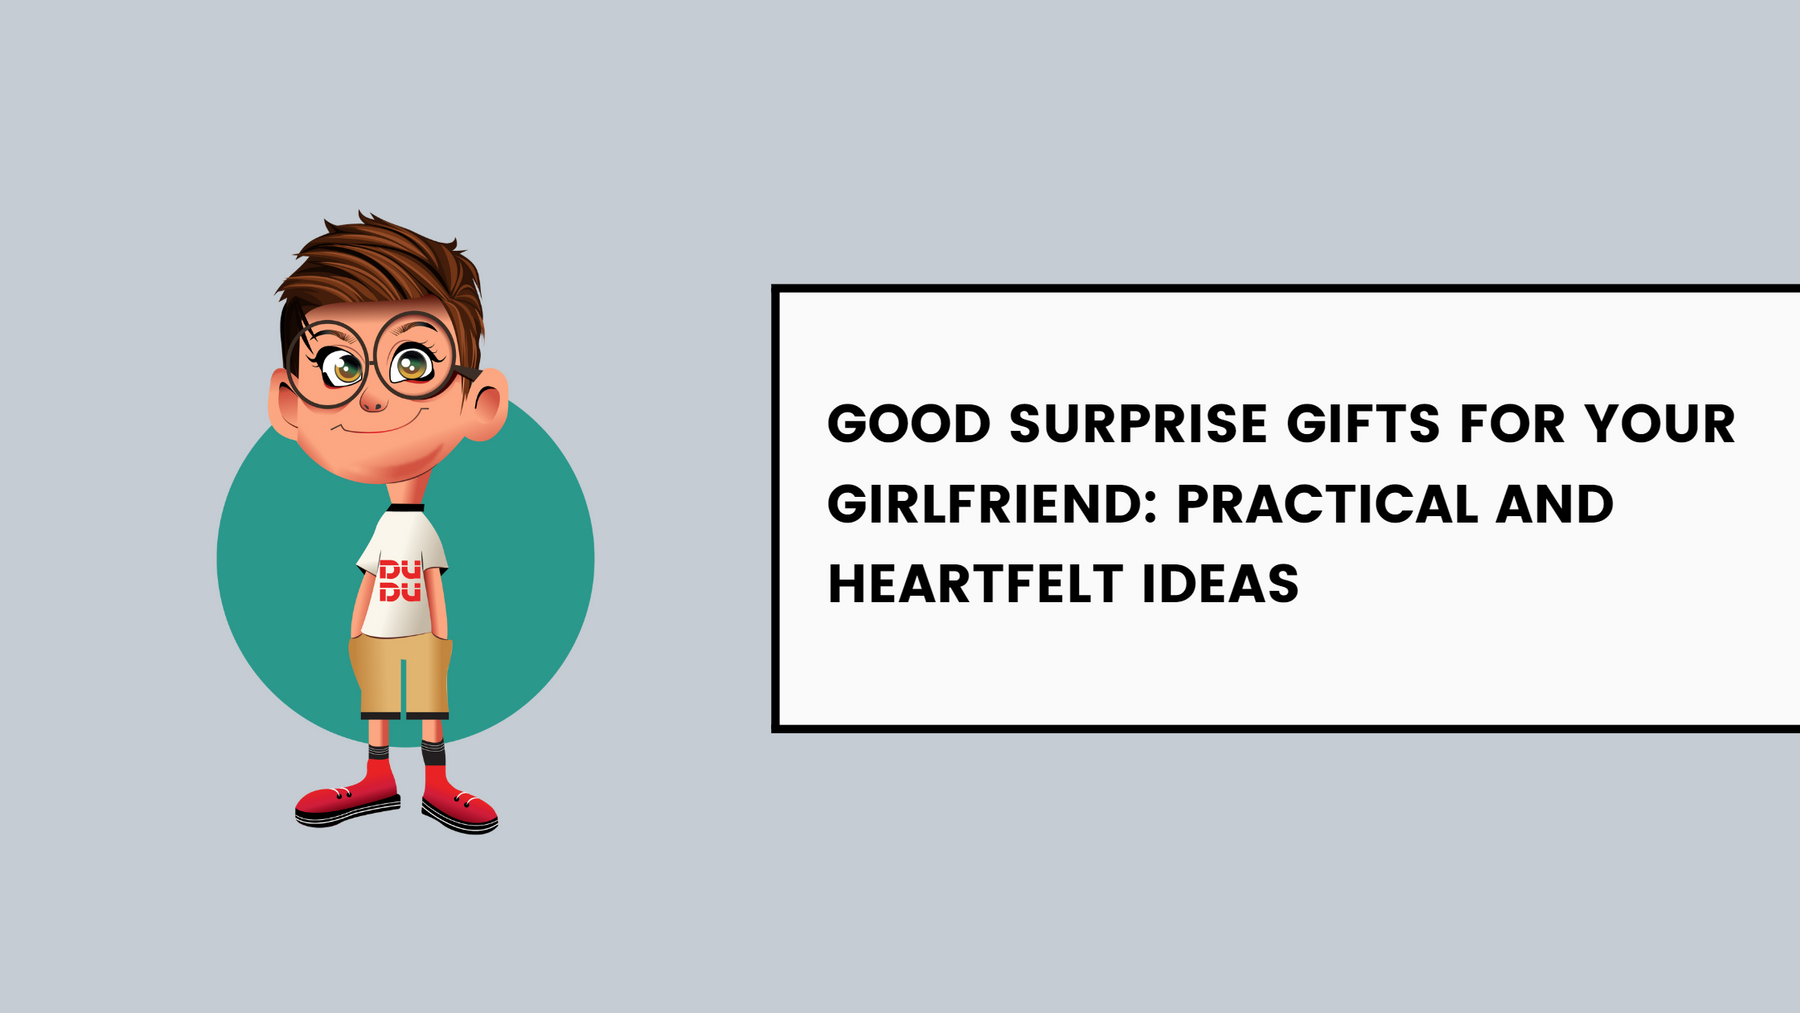 Good Surprise Gifts For Your Girlfriend: Practical And Heartfelt Ideas